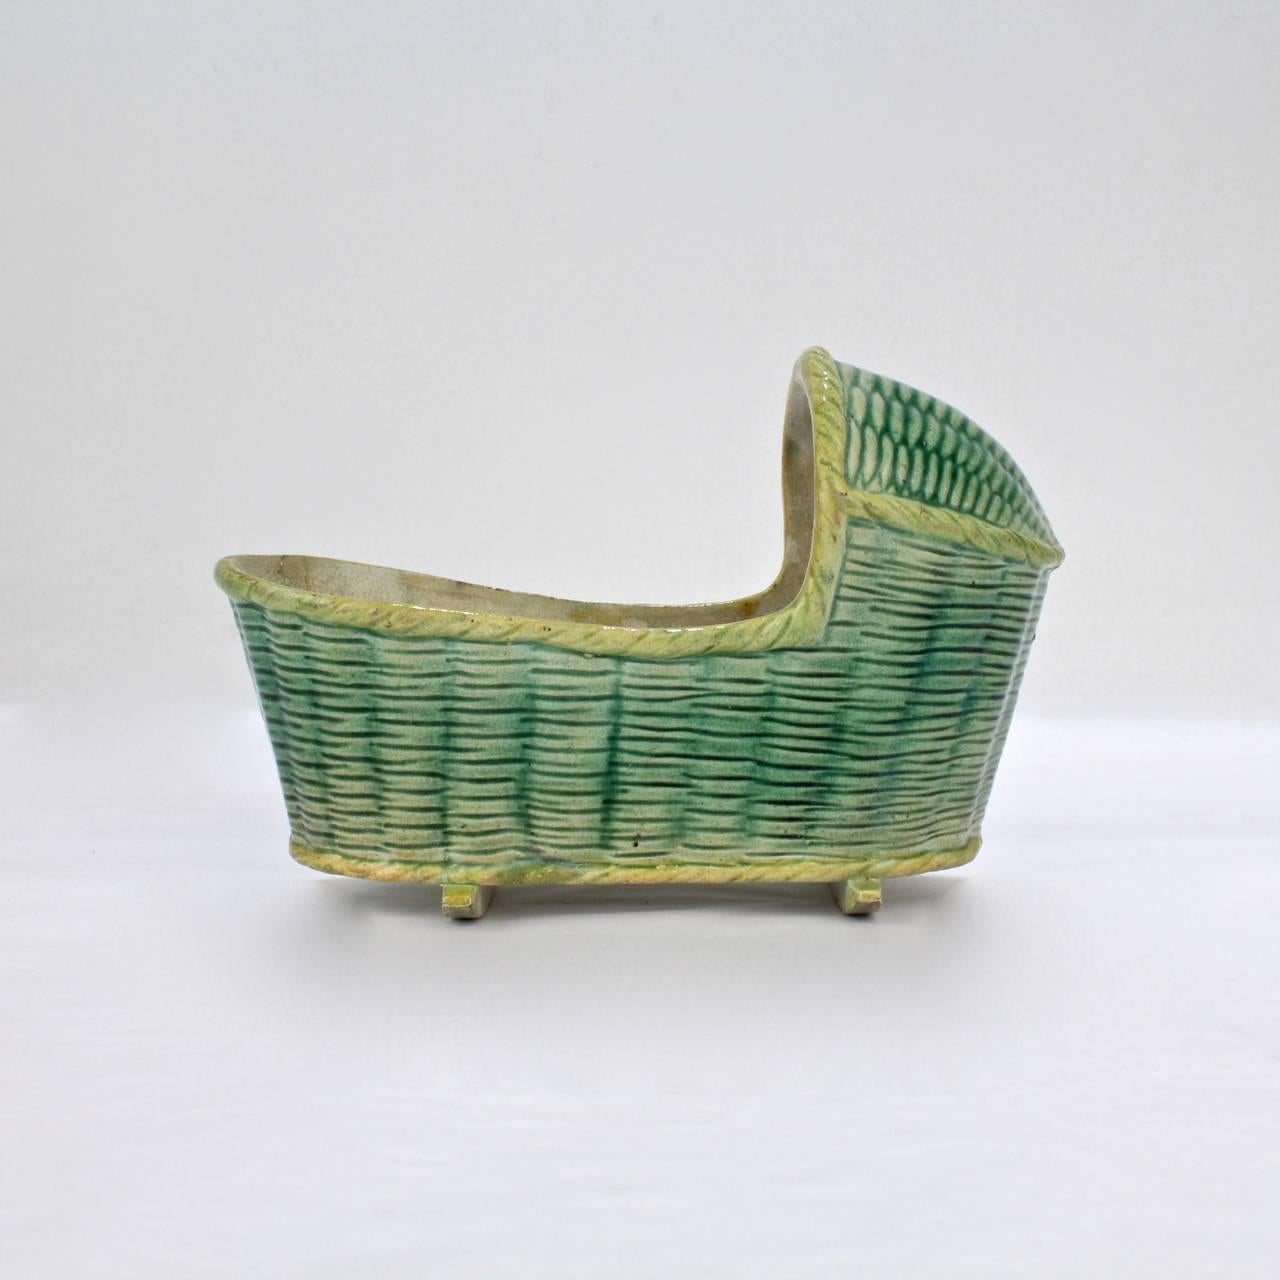 A late 18th or early 19th century English Prattware baby's cradle in a rare large size.

Decorated with an overall basket weave pattern and a yellow and green glaze.

Measures: Length ca. 5 7/8 in.

Items purchased from this dealer must